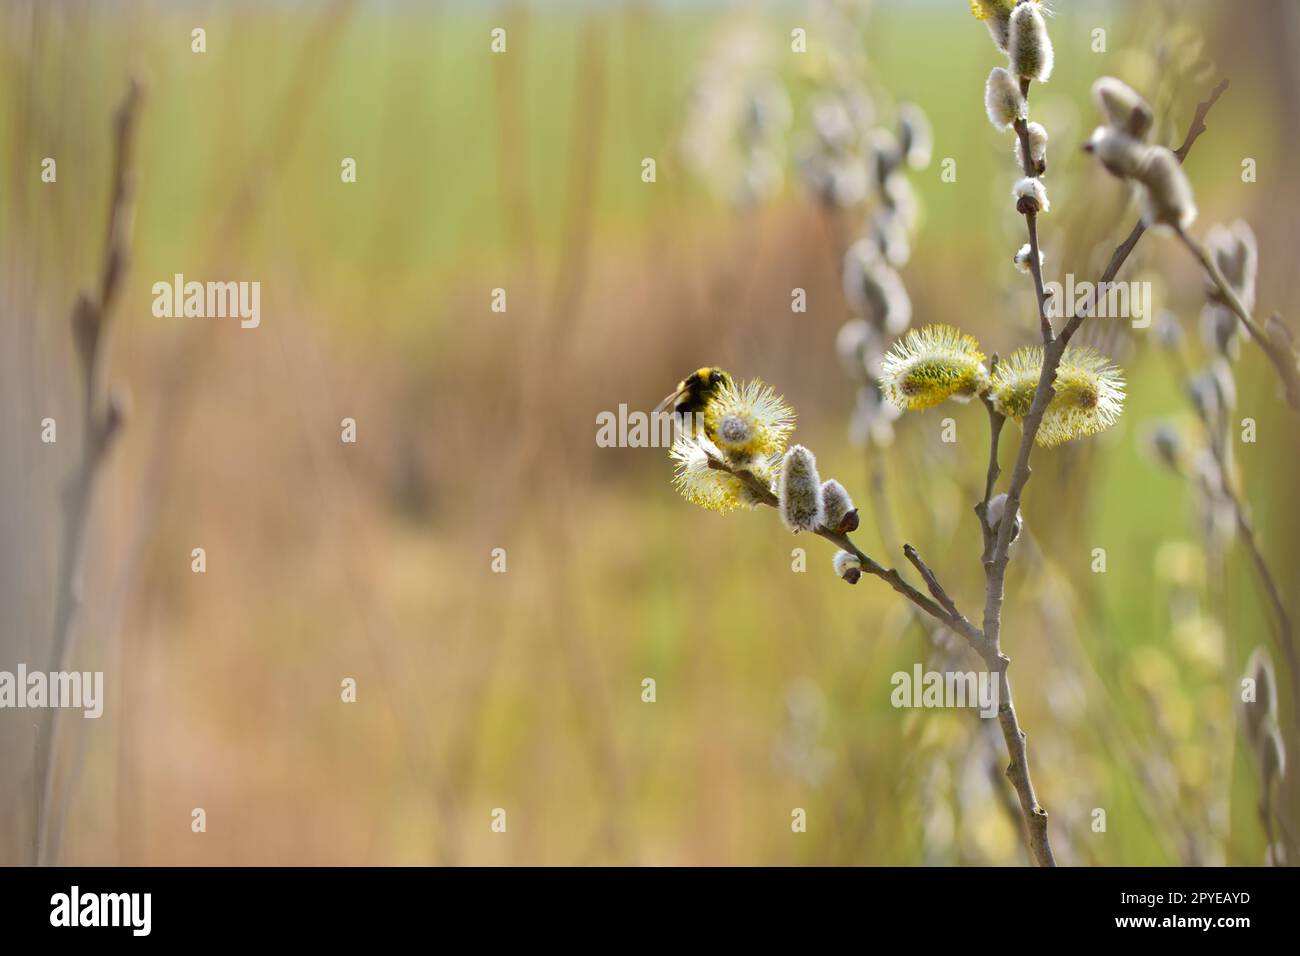 Bee on a flowering willow salicaceae against a blurred background Stock Photo